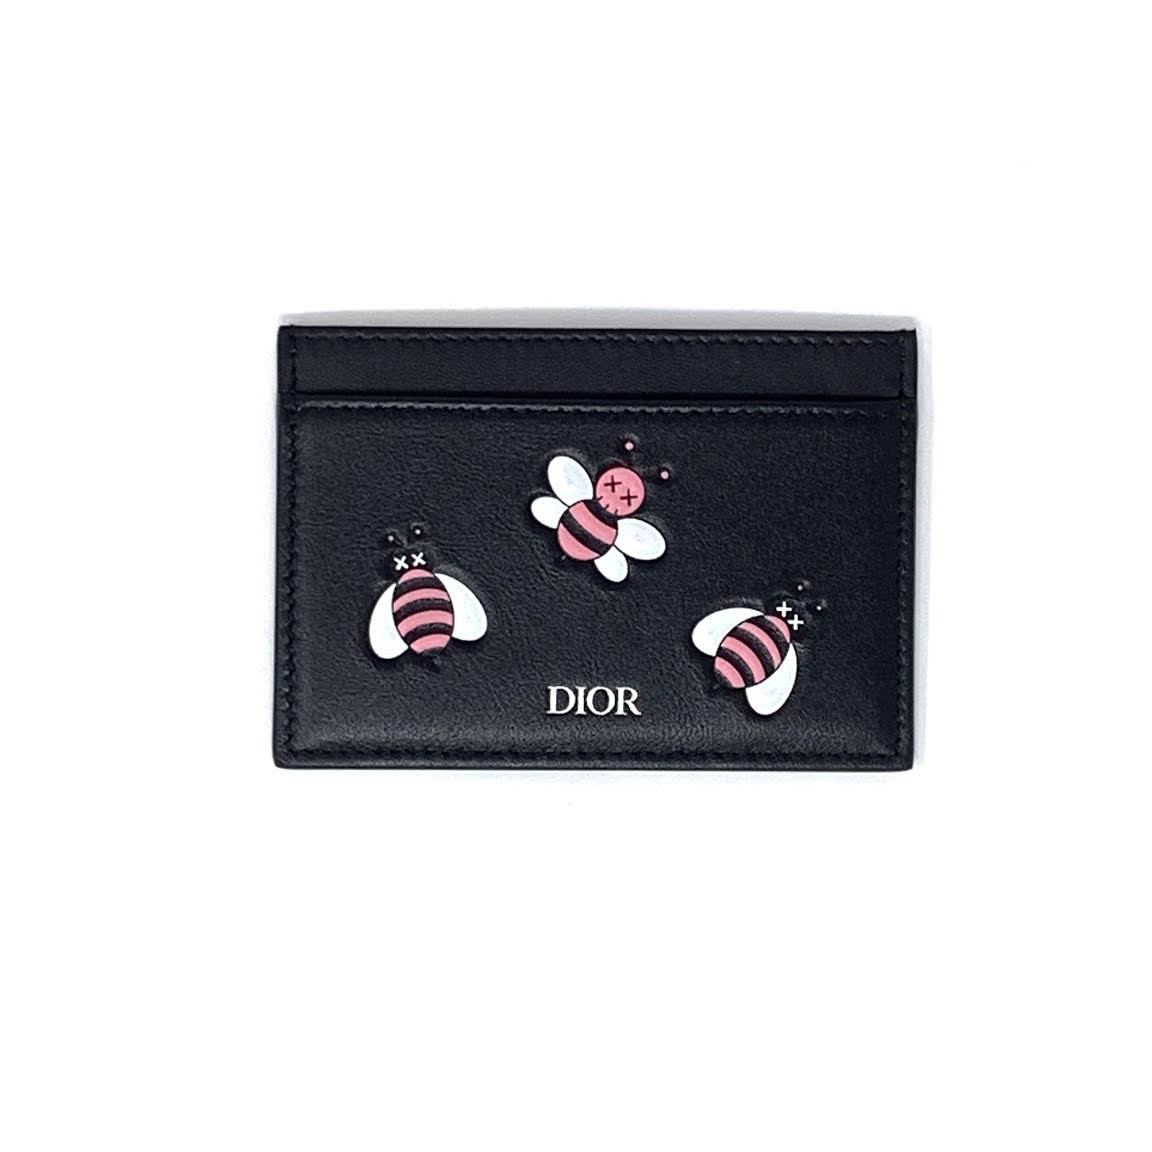 dior x kaws black card holder with pink bees